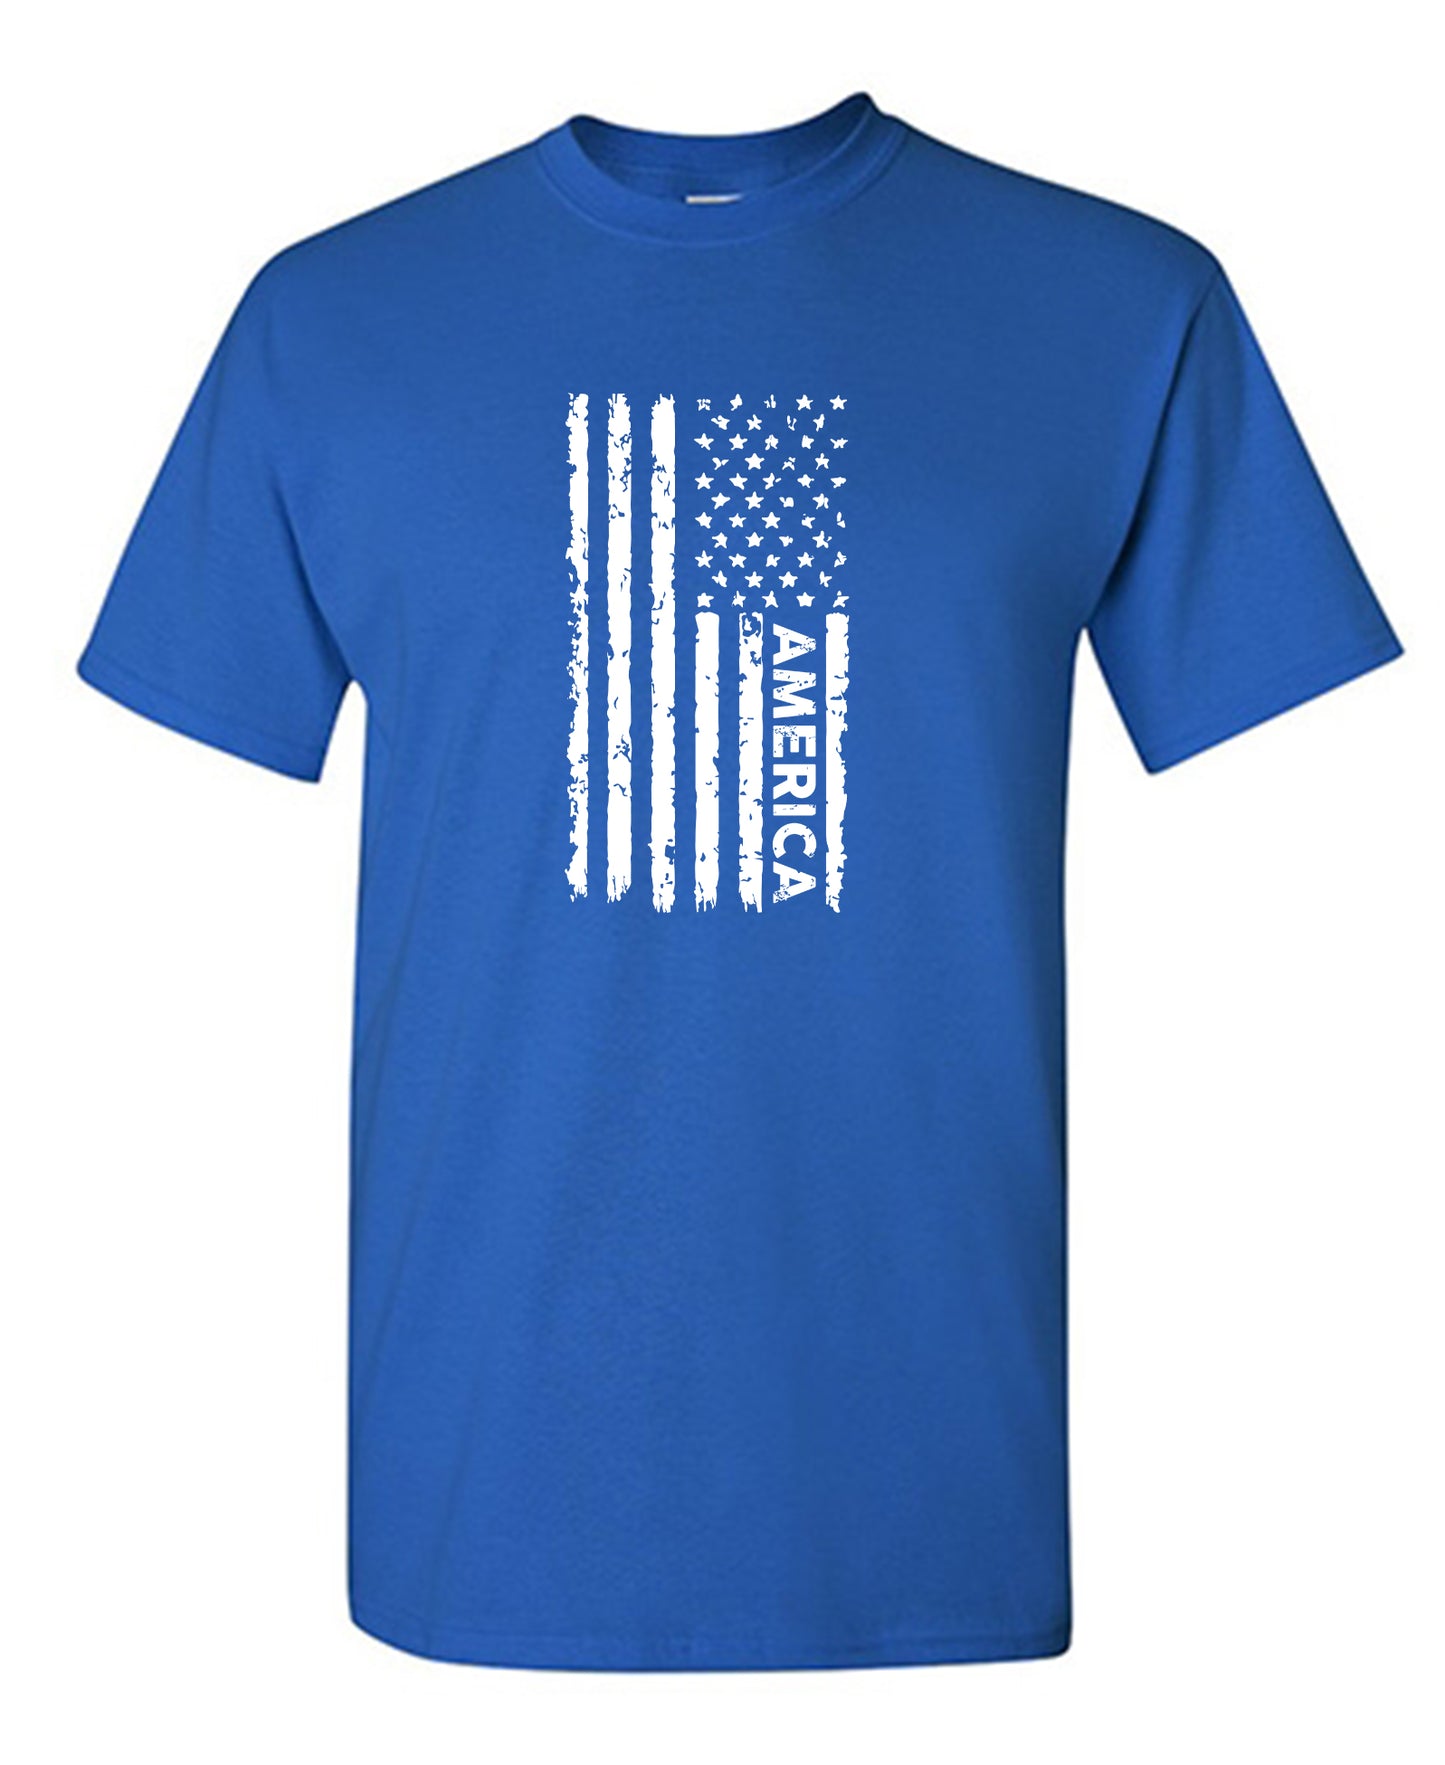 America's Flag USA, 4th of July Shirt - Funny T Shirts & Graphic Tees